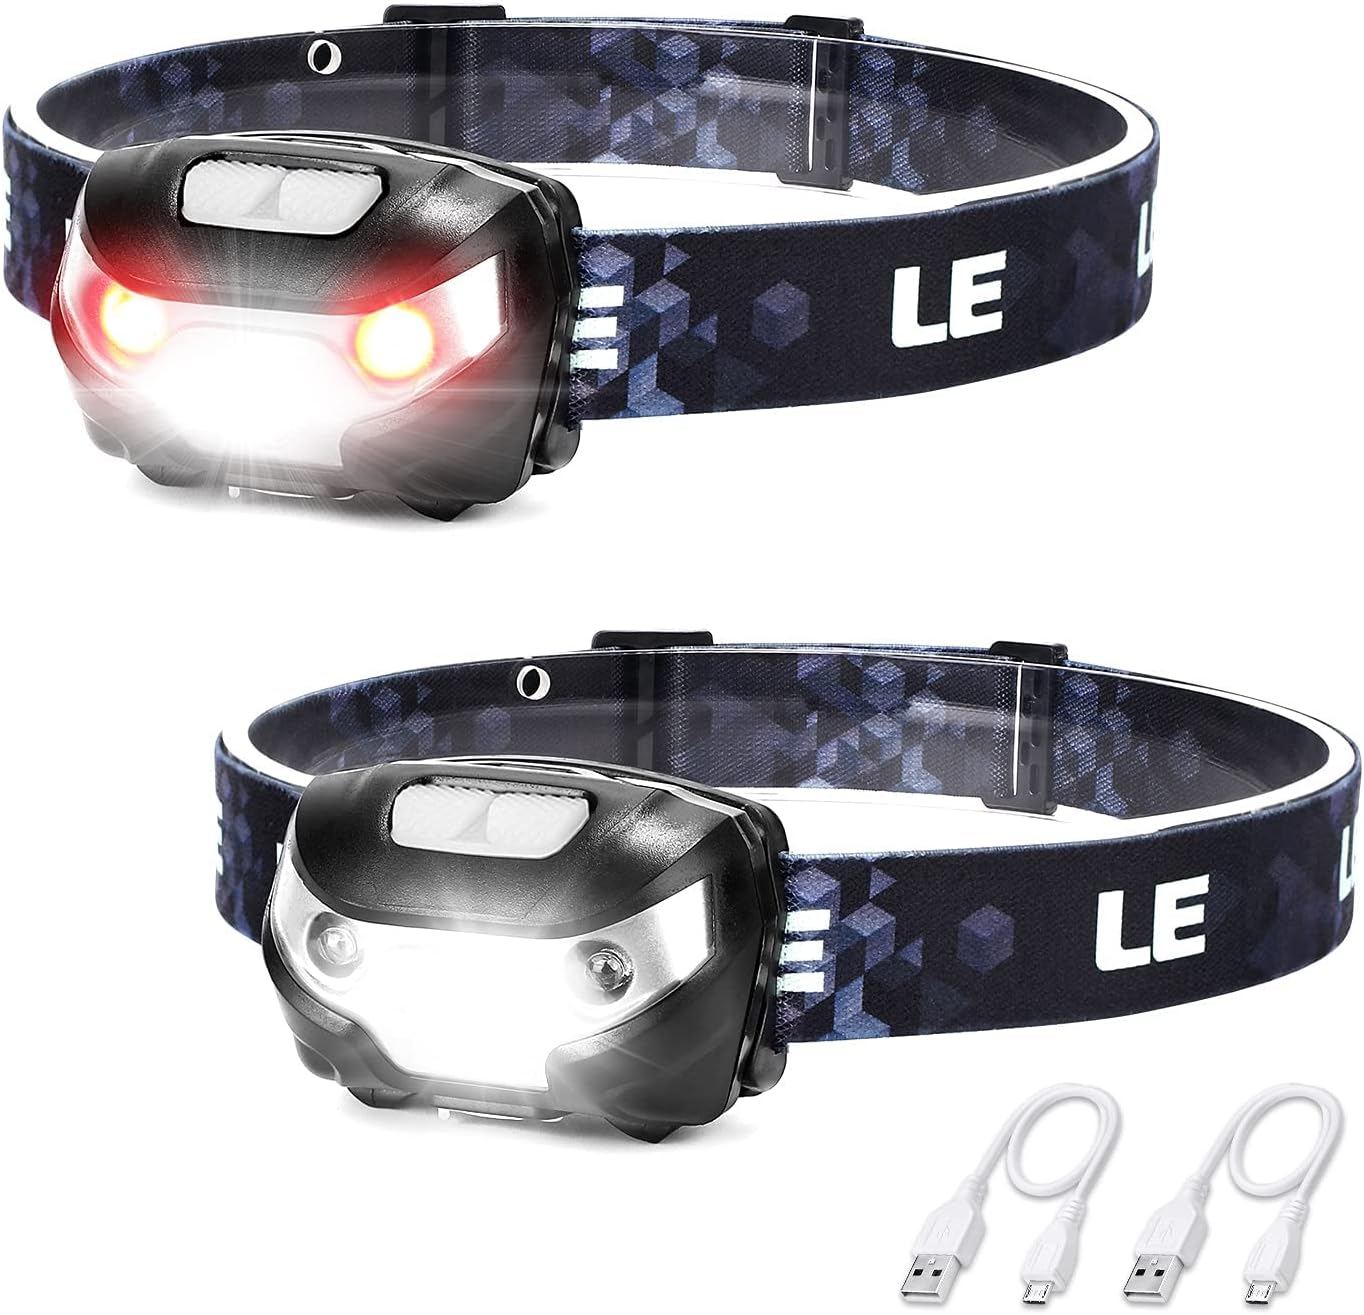 Lighting EVER LED Rechargeable Headlamp, L3200 High [...]